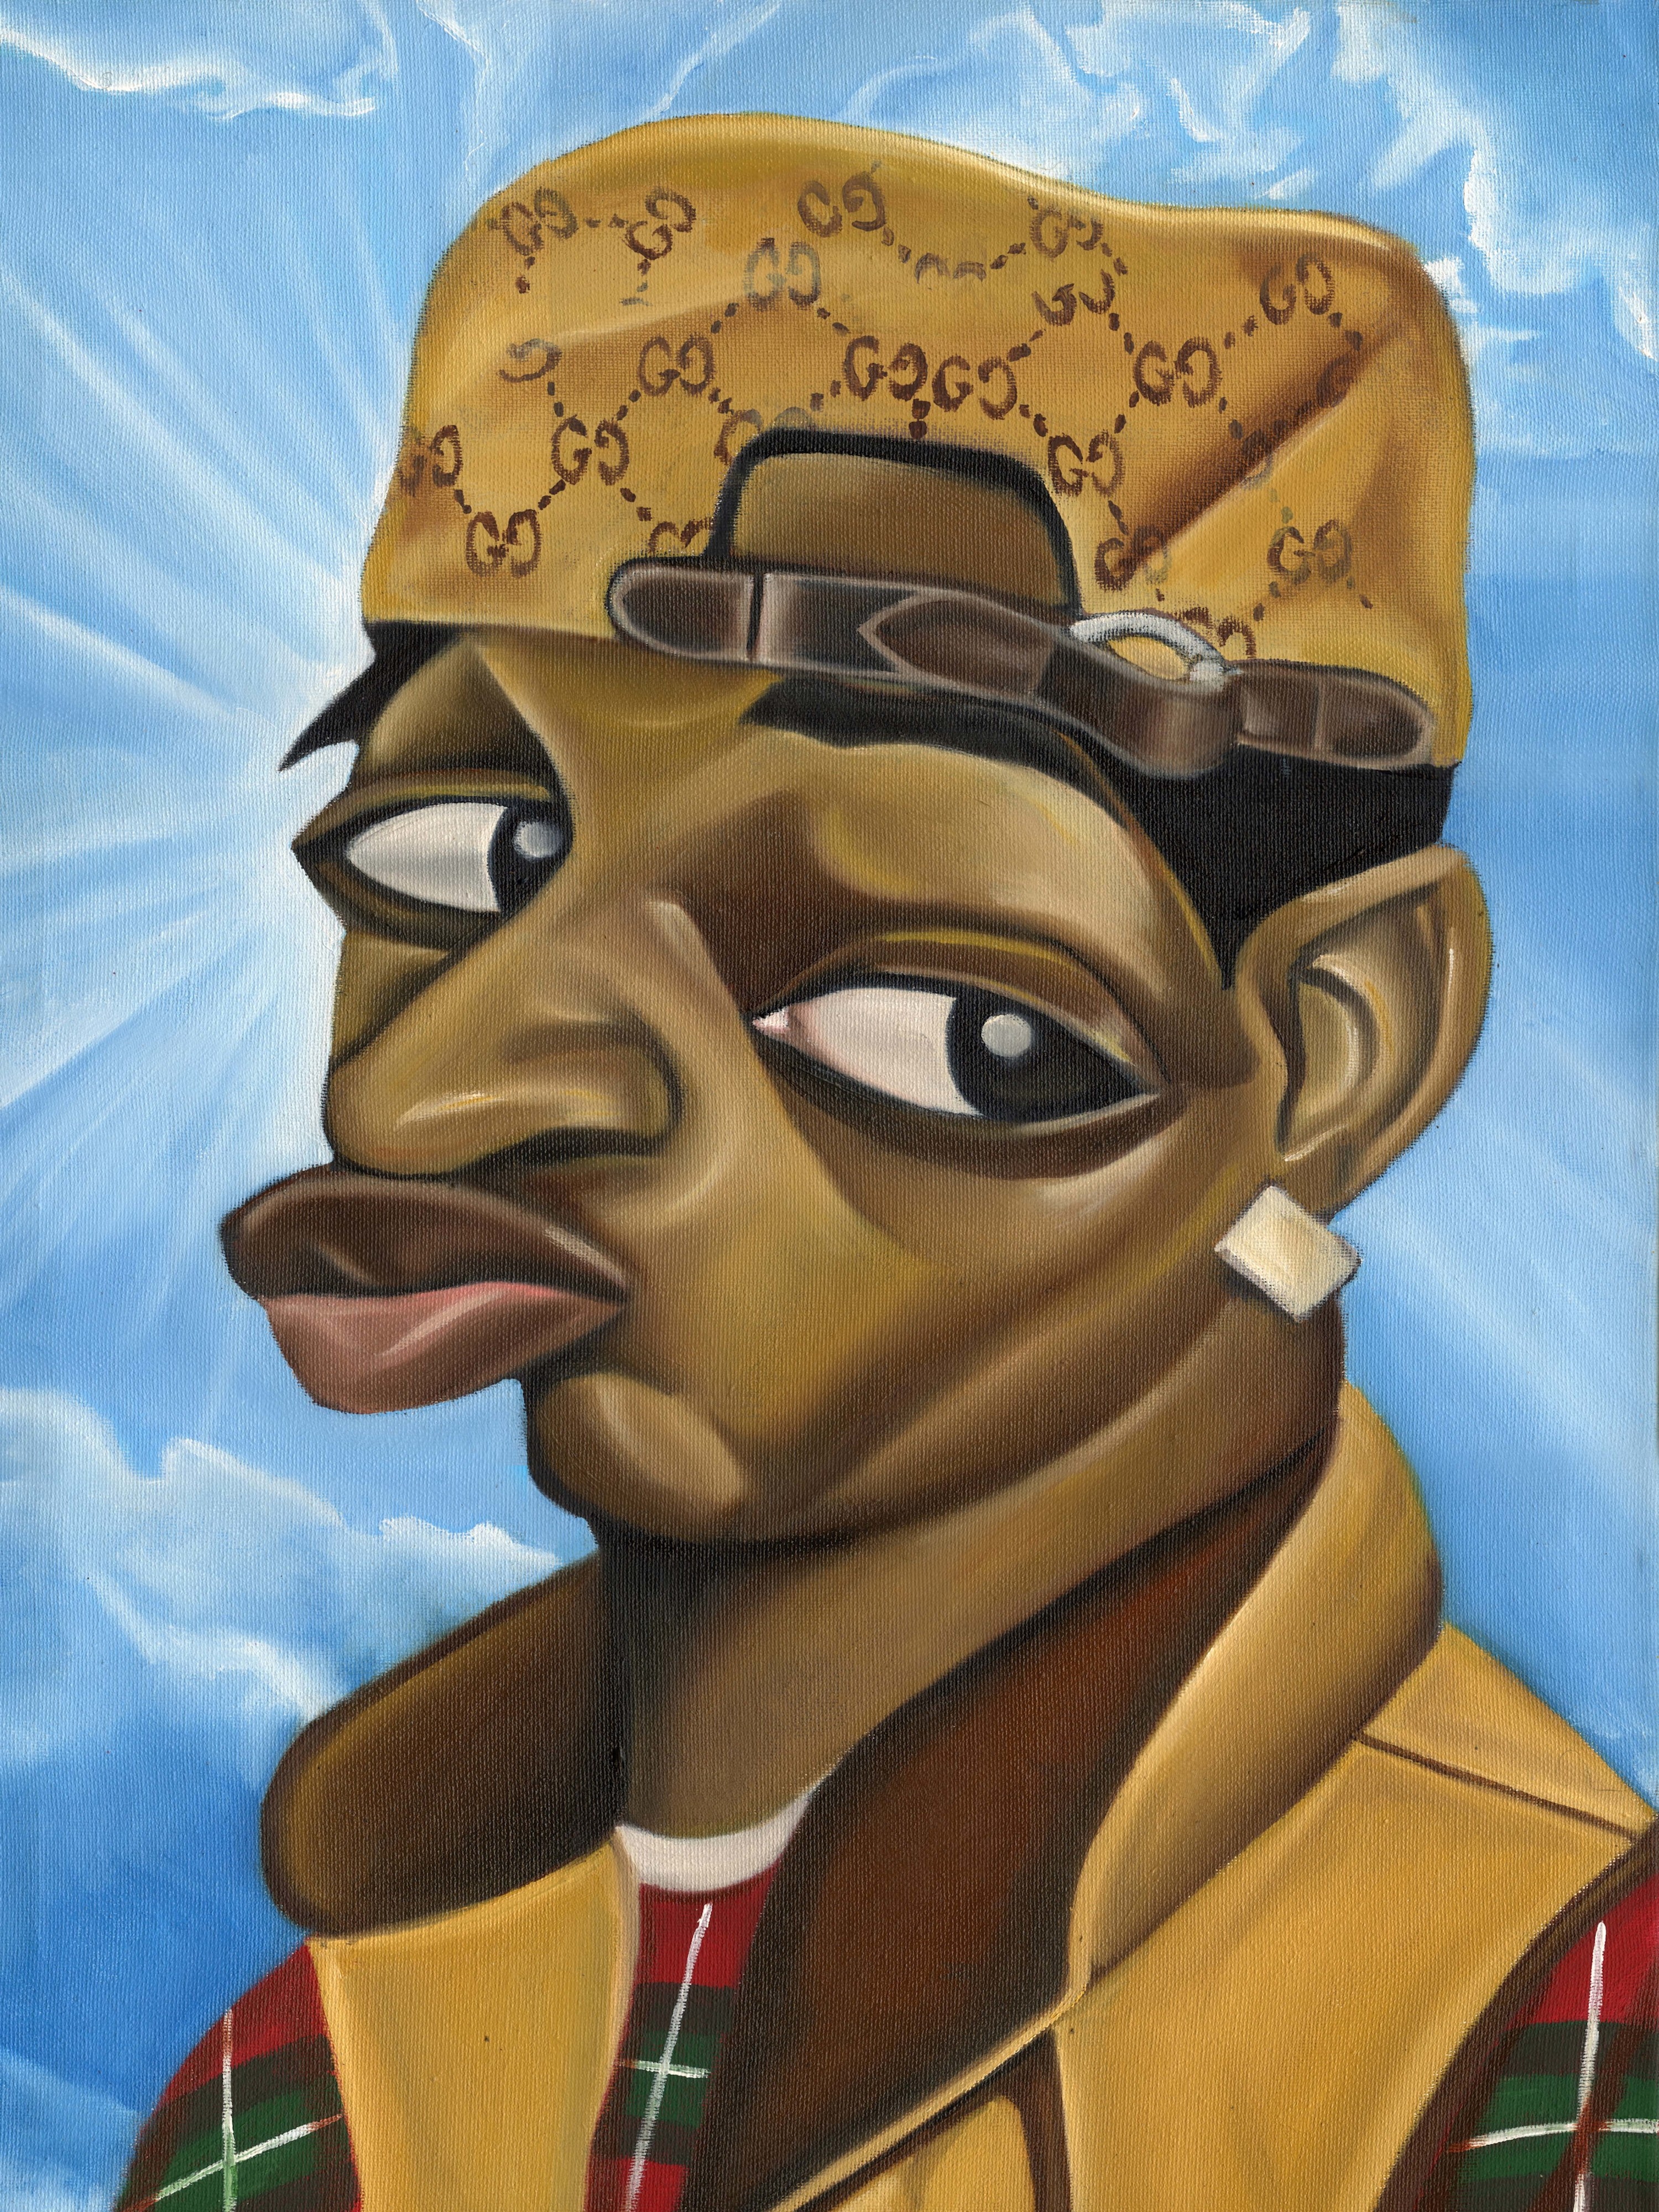 An oil painting of rapper Conceited giving a side-eye